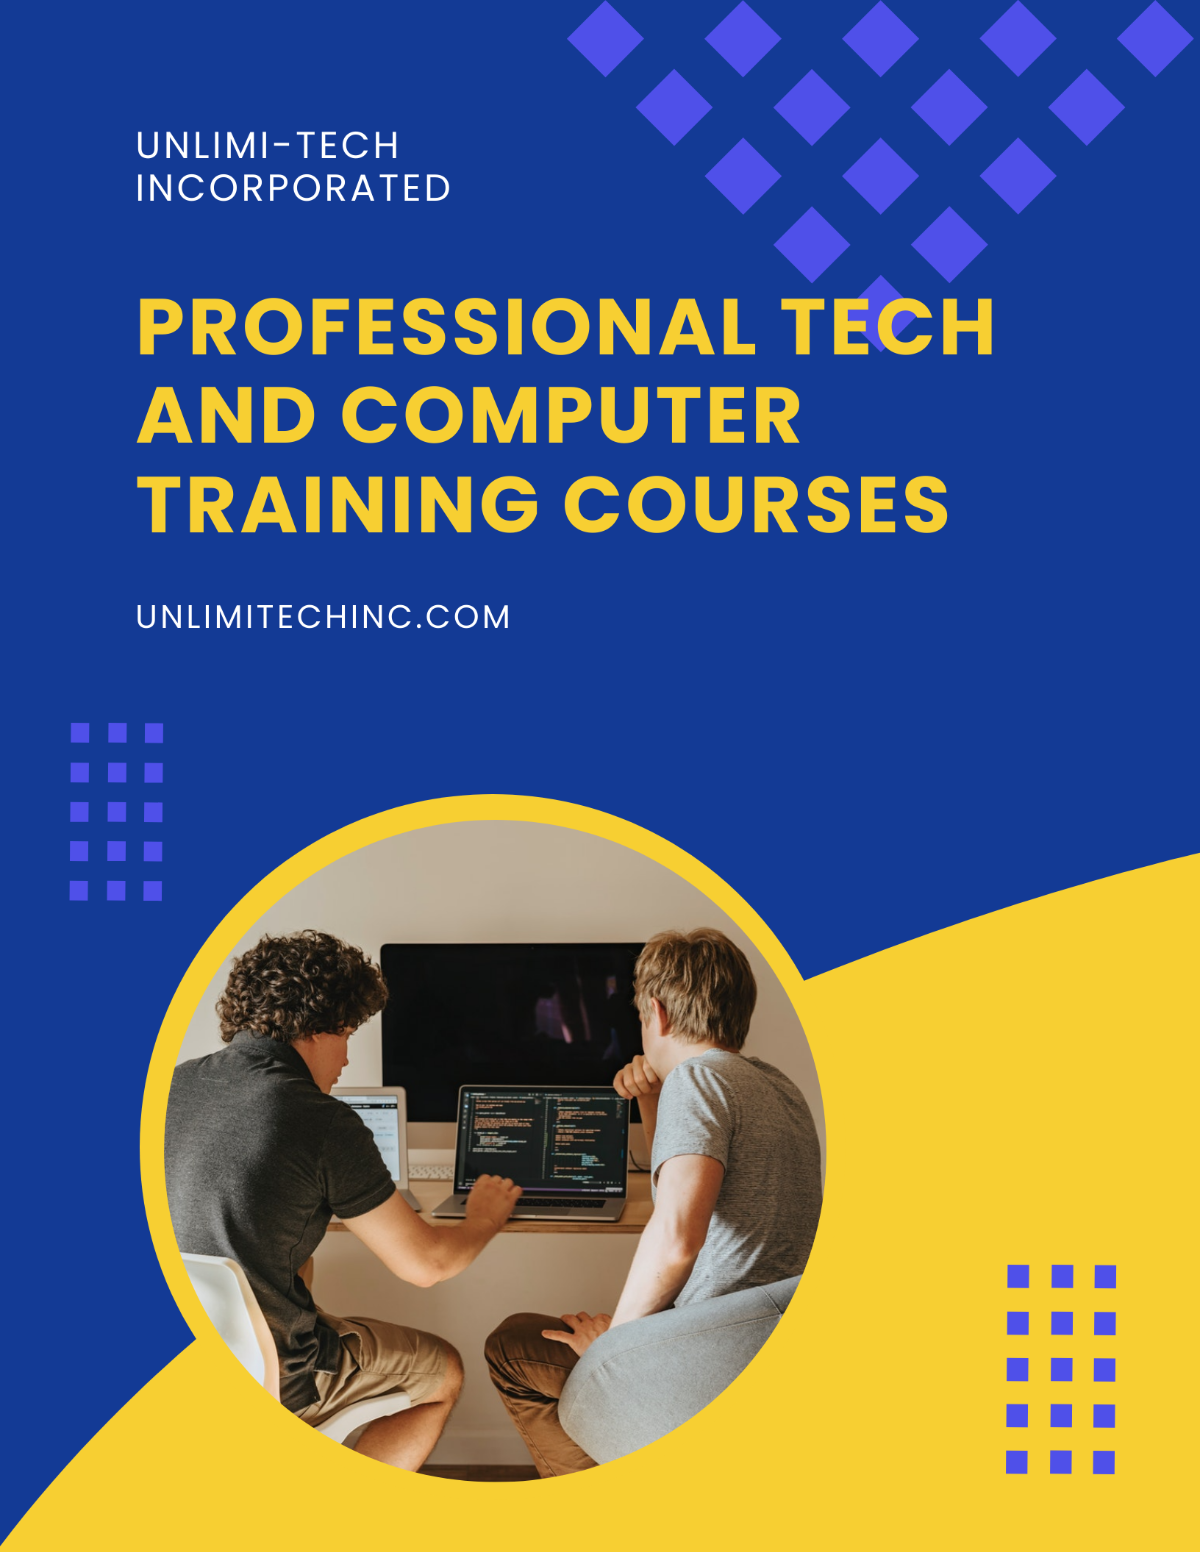 Training Courses Flyer